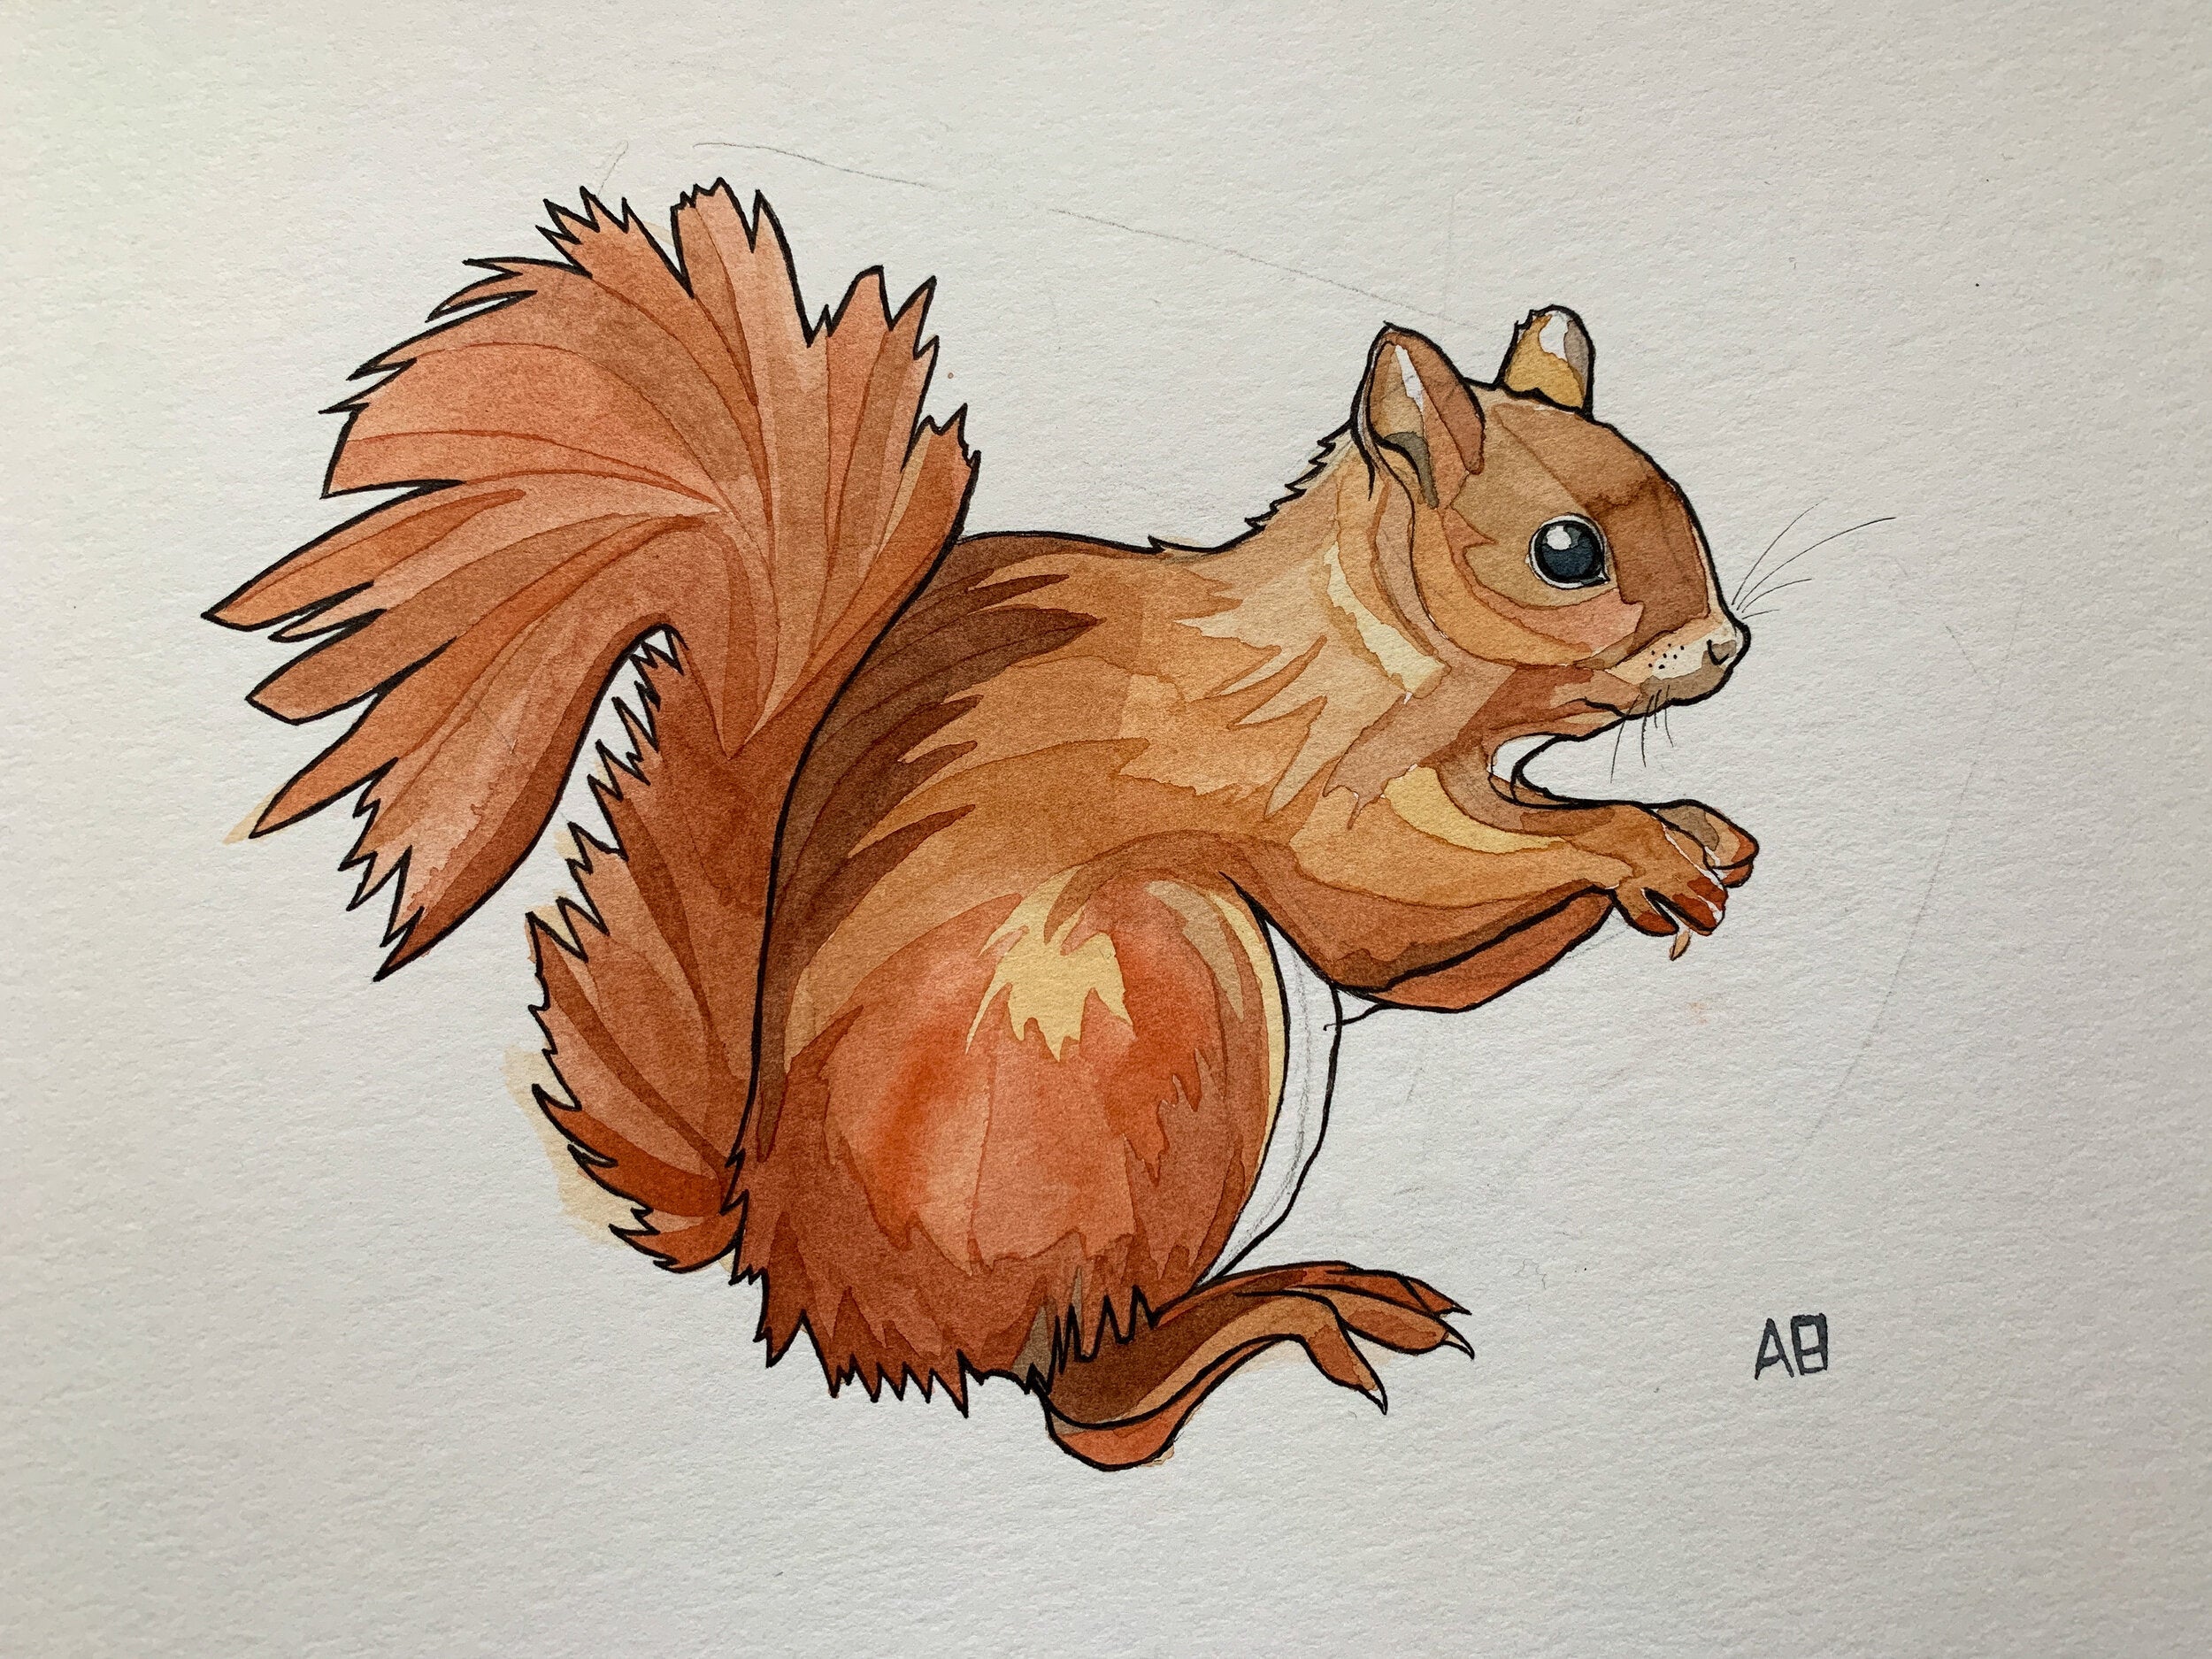 I drew my mum's favourite animal for her, a red squirrel. Coloured pencil  on cotton paper, 10x10in : r/drawing